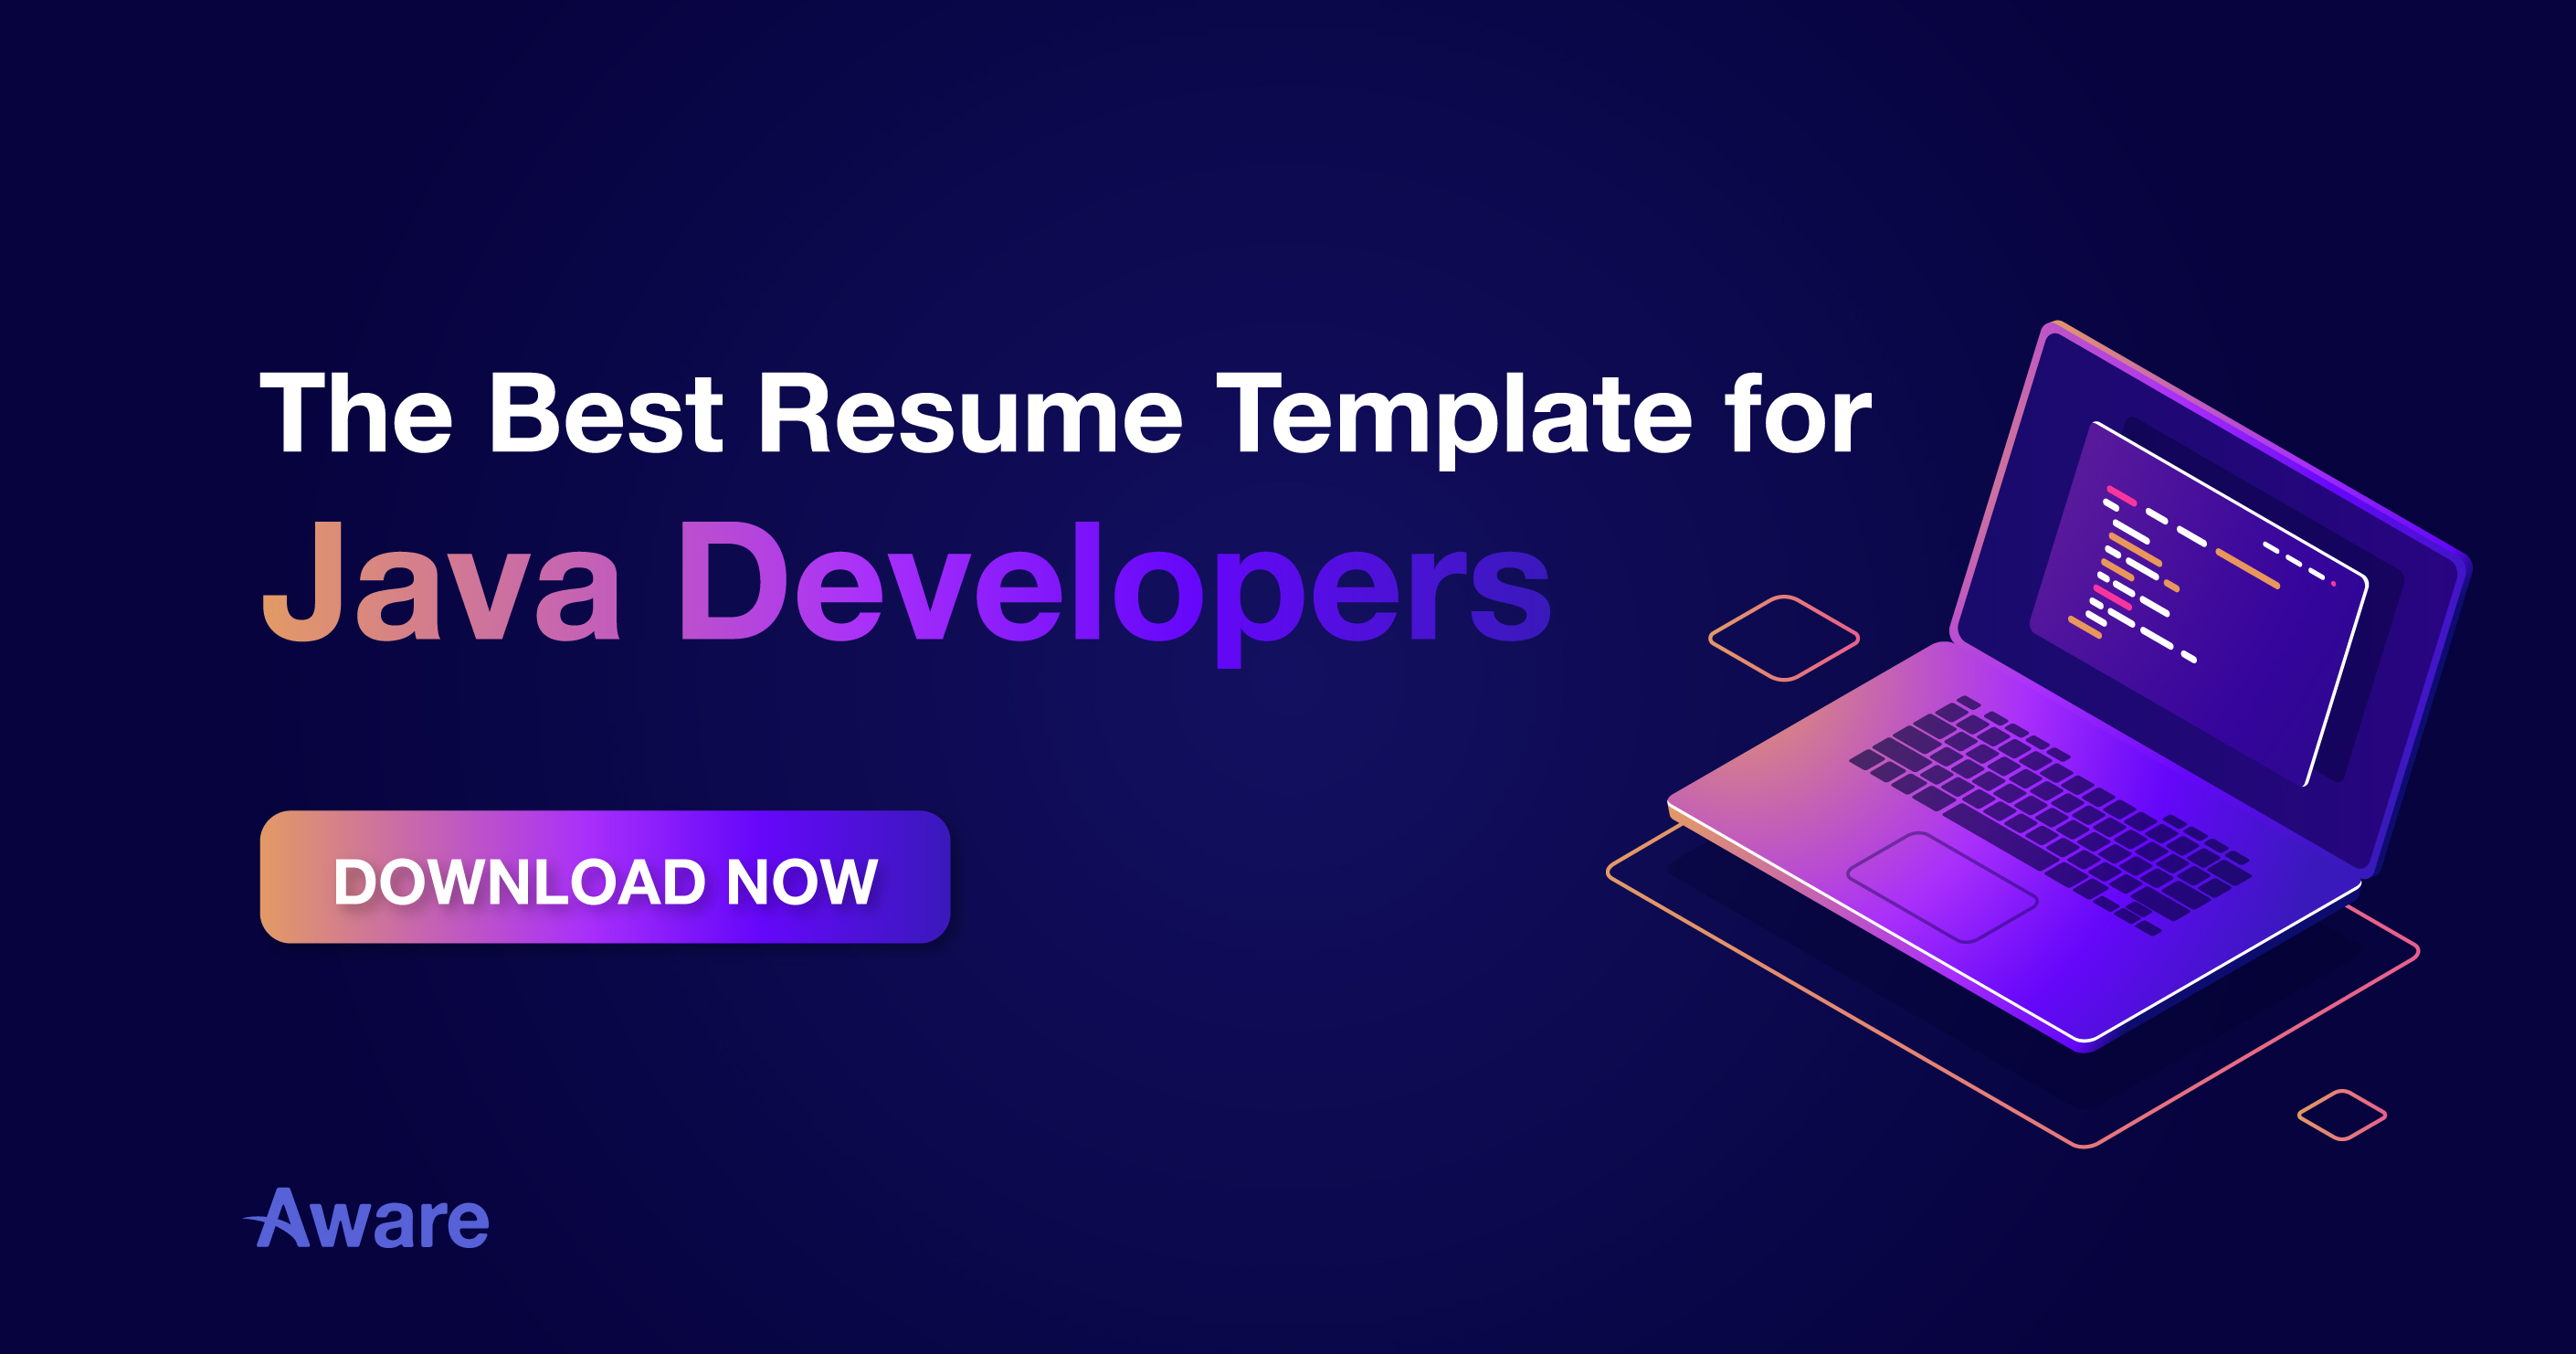 The Best Resume Template for Java Developers